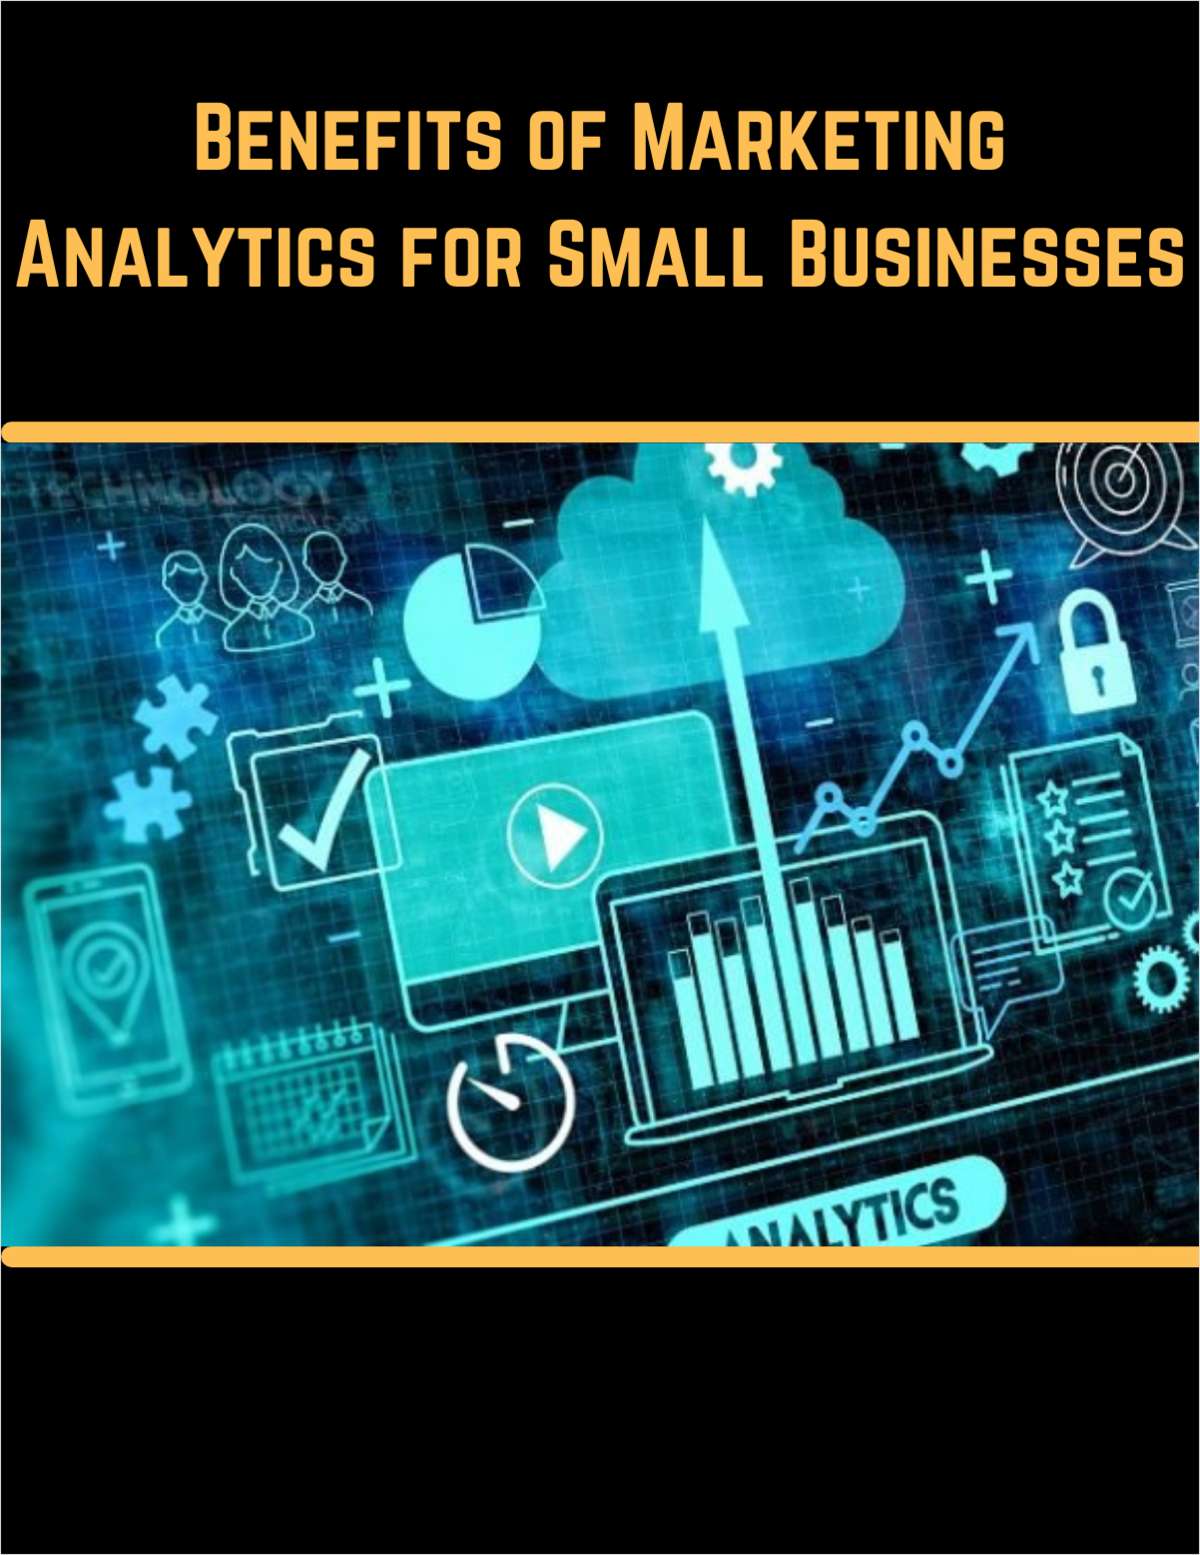 Benefits of Marketing Data Analytics for Small Businesses